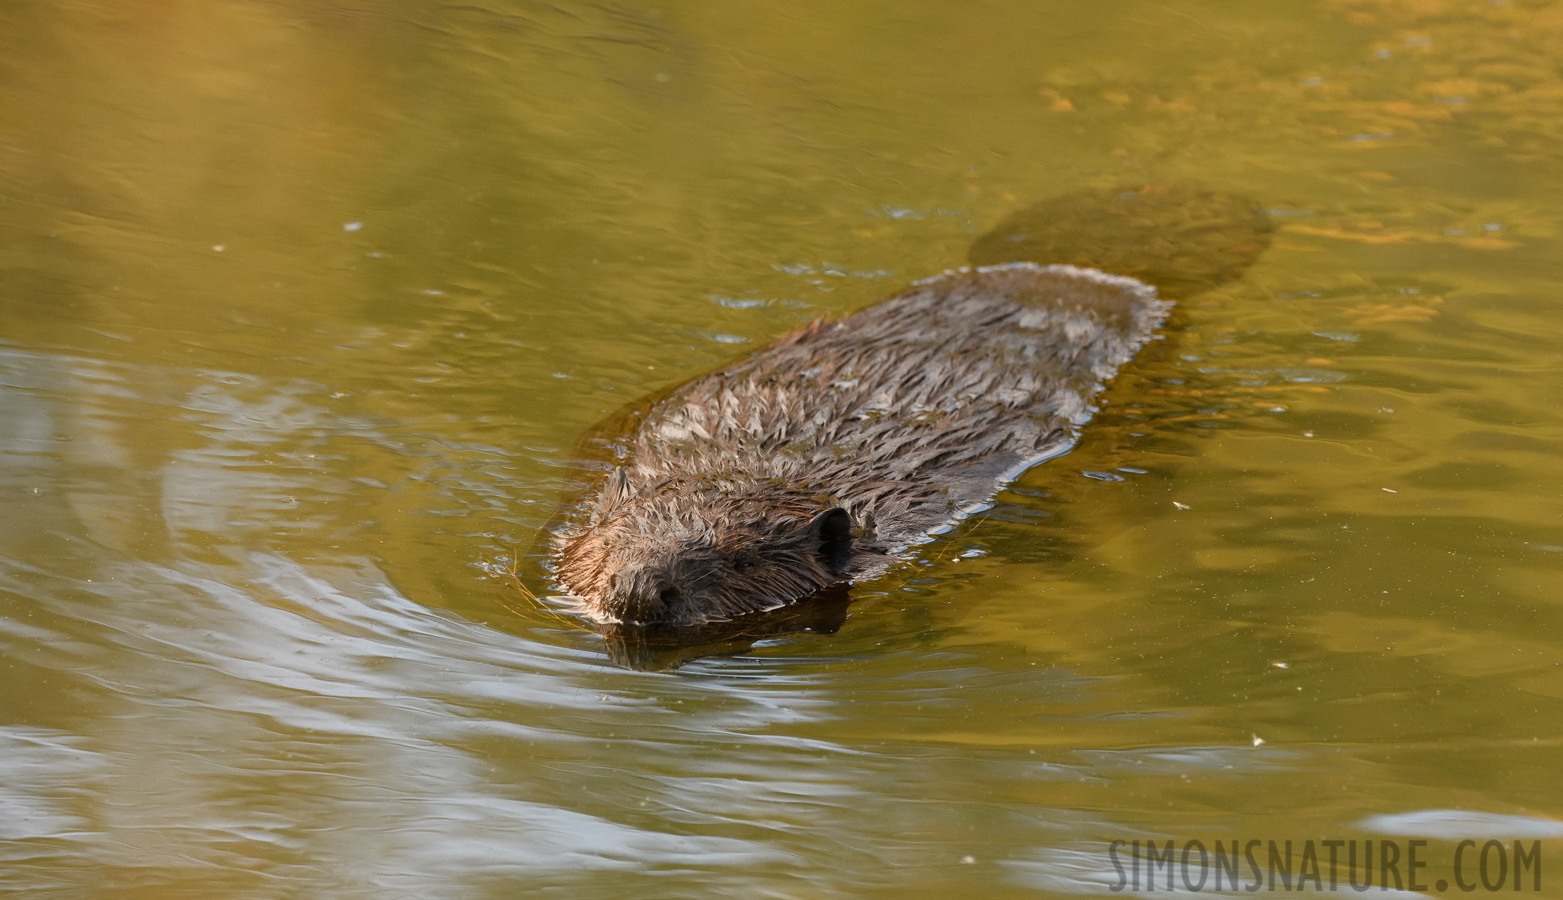 Castor canadensis [400 mm, 1/500 sec at f / 8.0, ISO 1600]